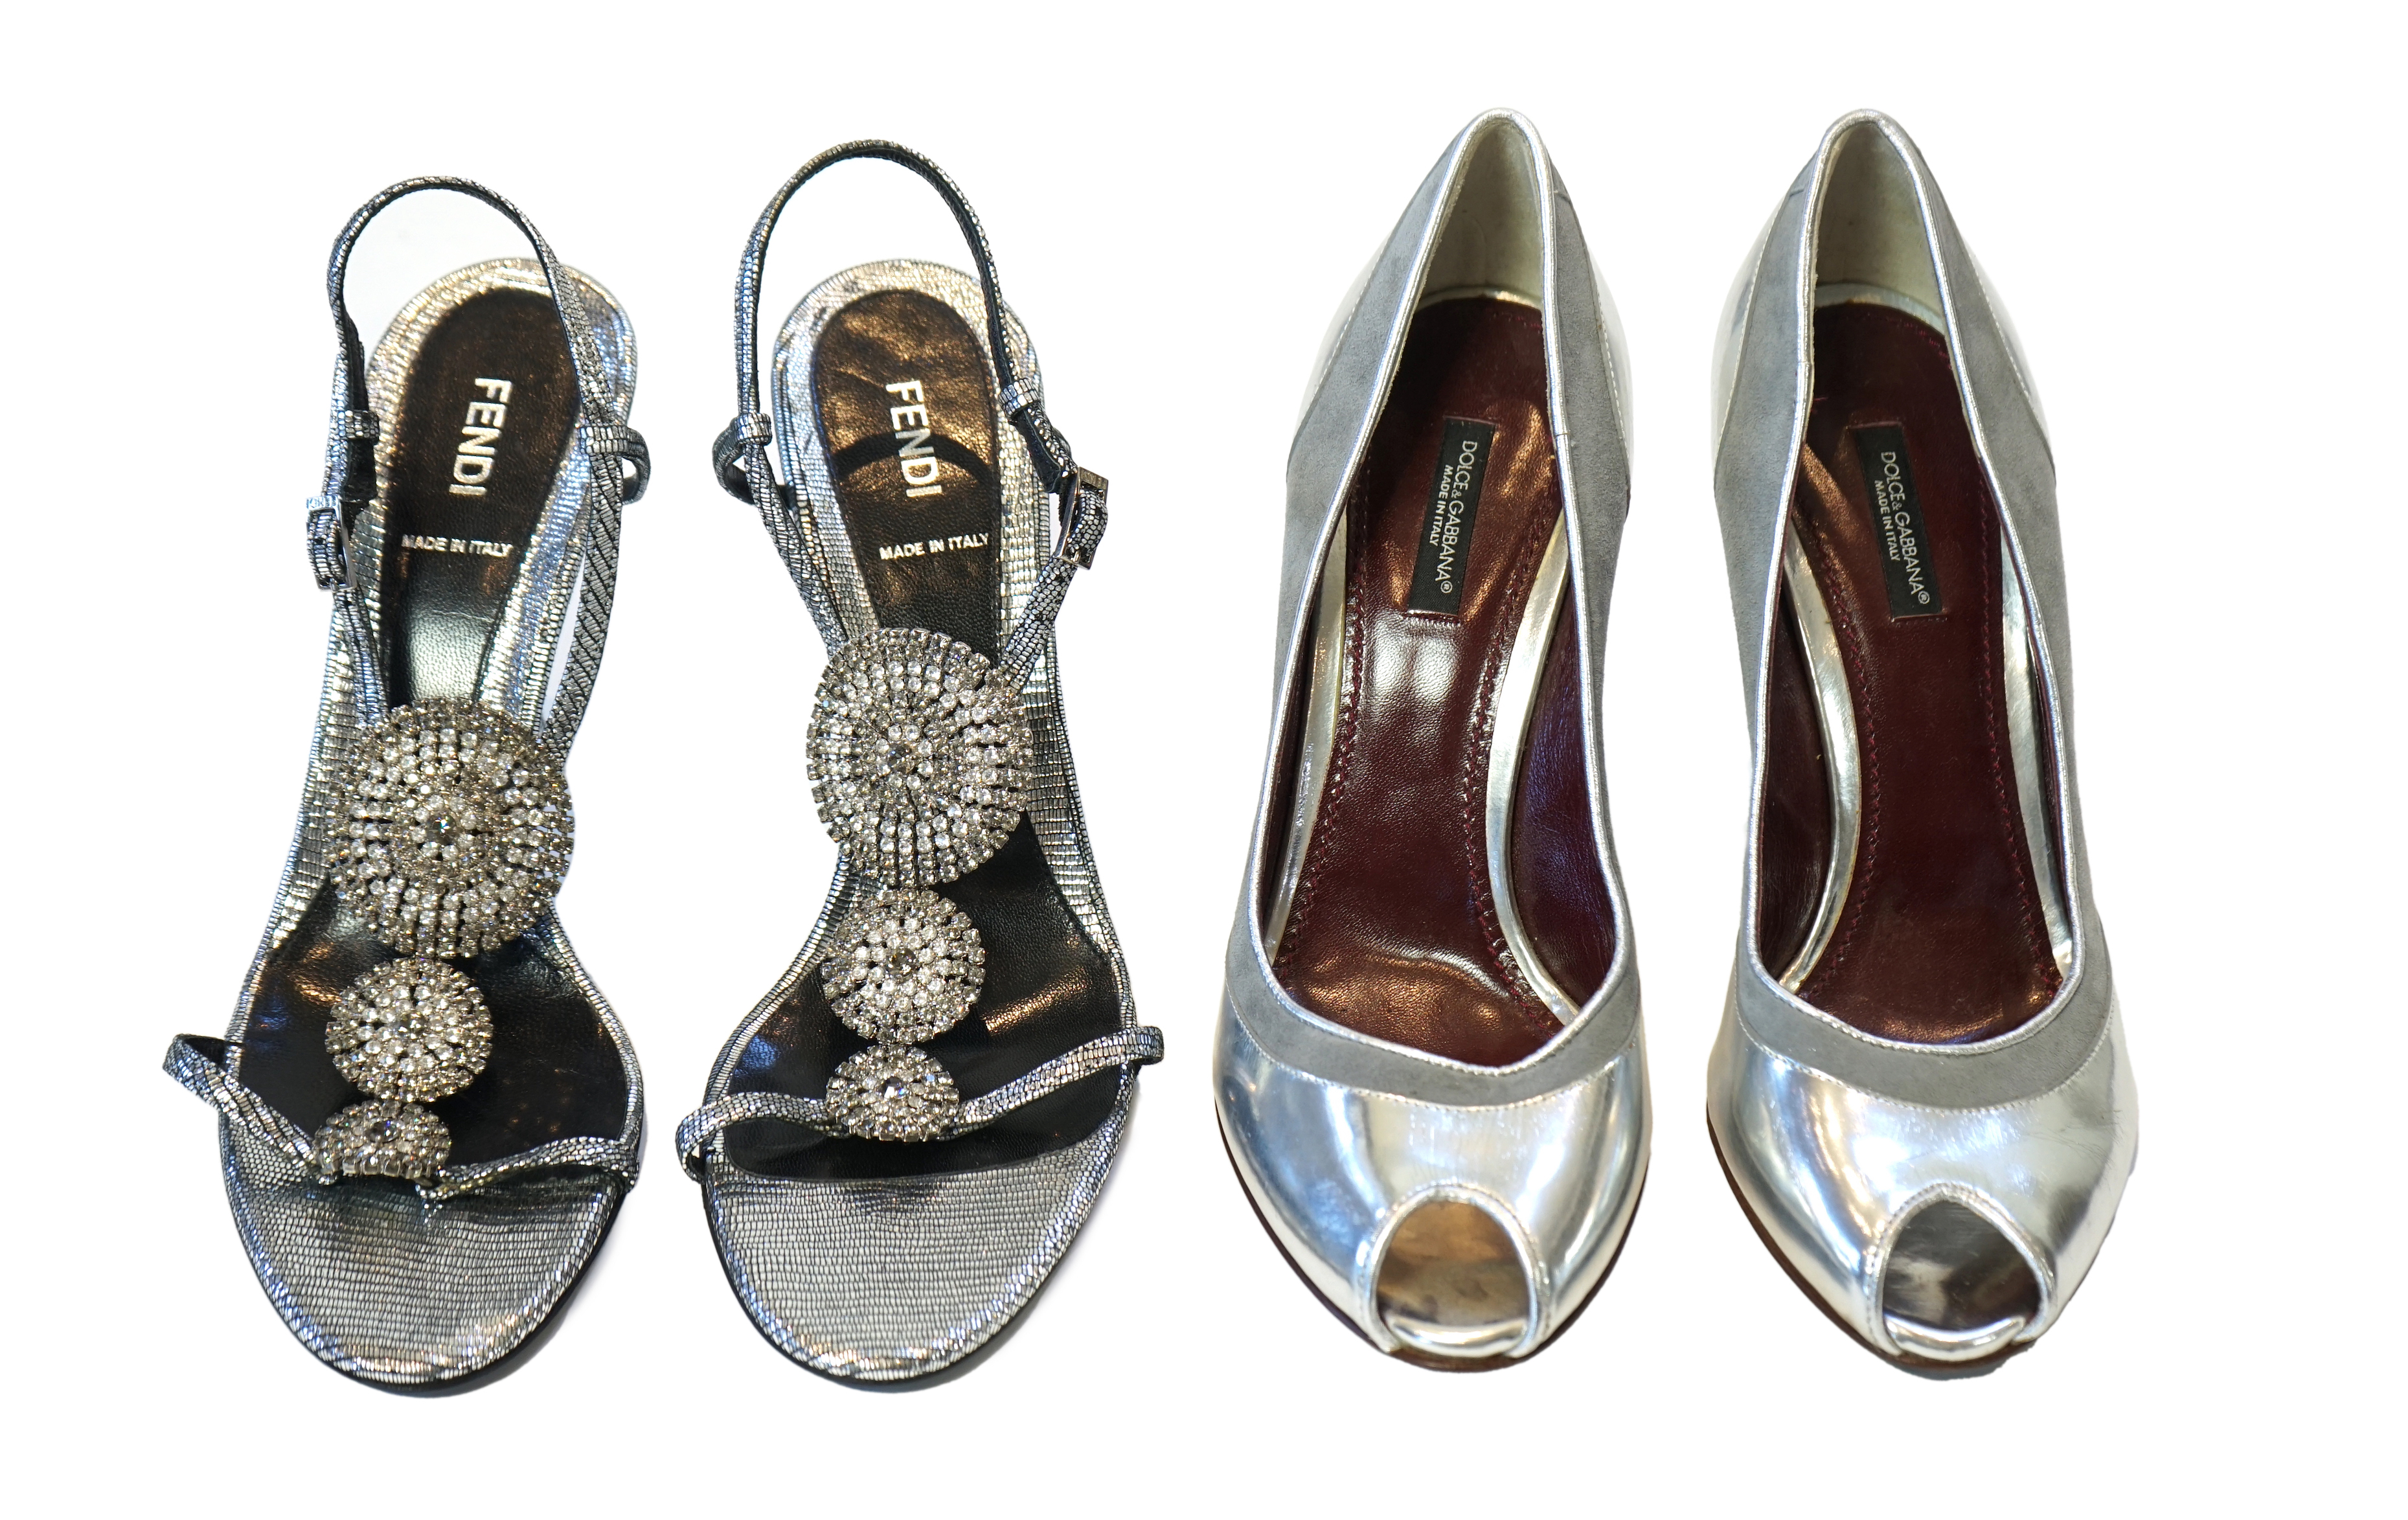 A pair of Fendi lady's metallic silver sandals with three diamante circle detail and a pair of Dolce and Gabbana silver patent leather and suede peep toe heels, size EU 39/40